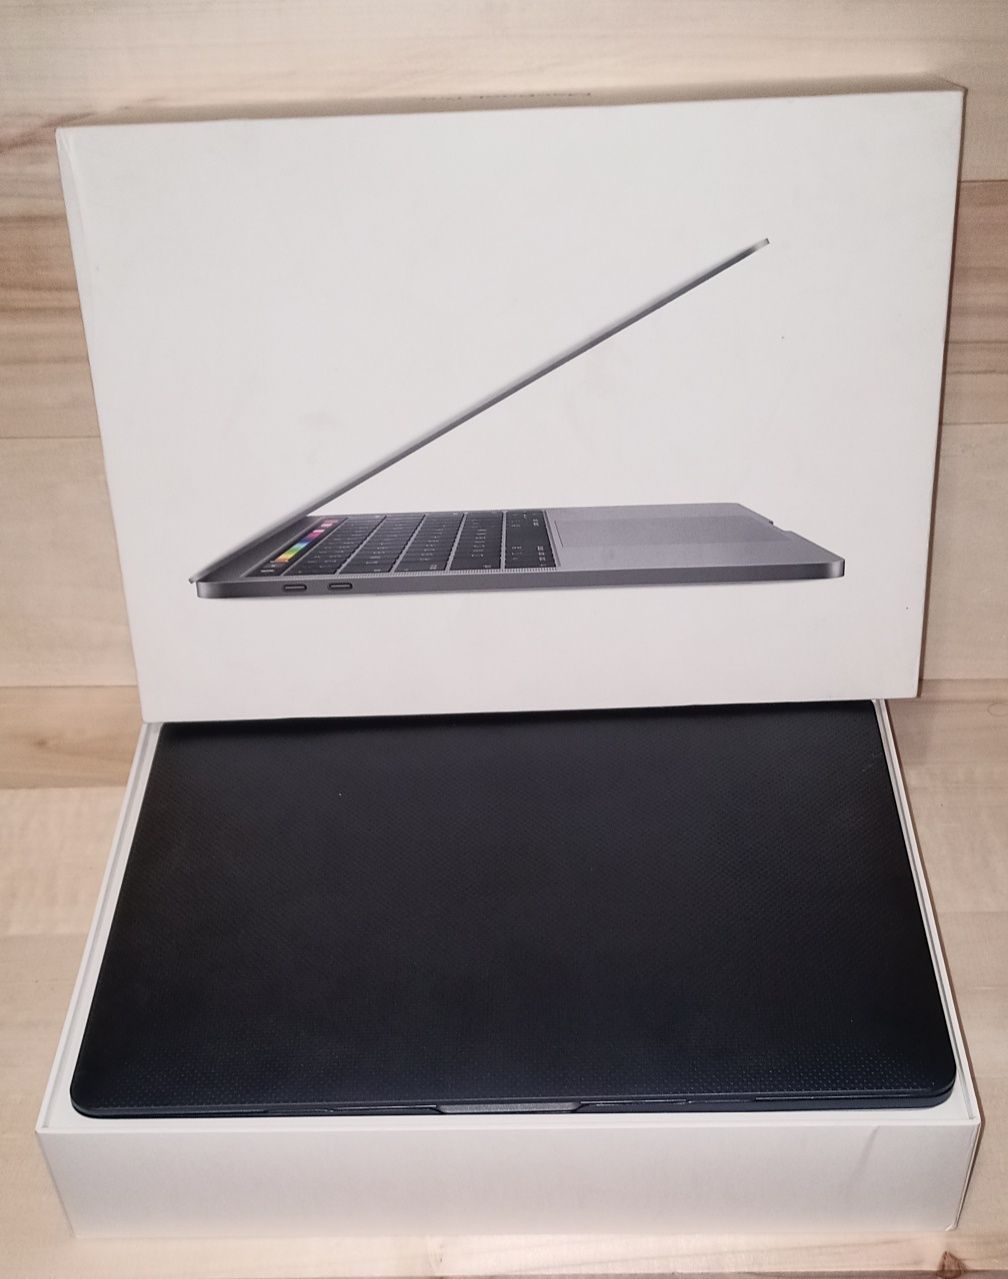 MacBook Pro 13" Retina with Touch Bar 256 GB